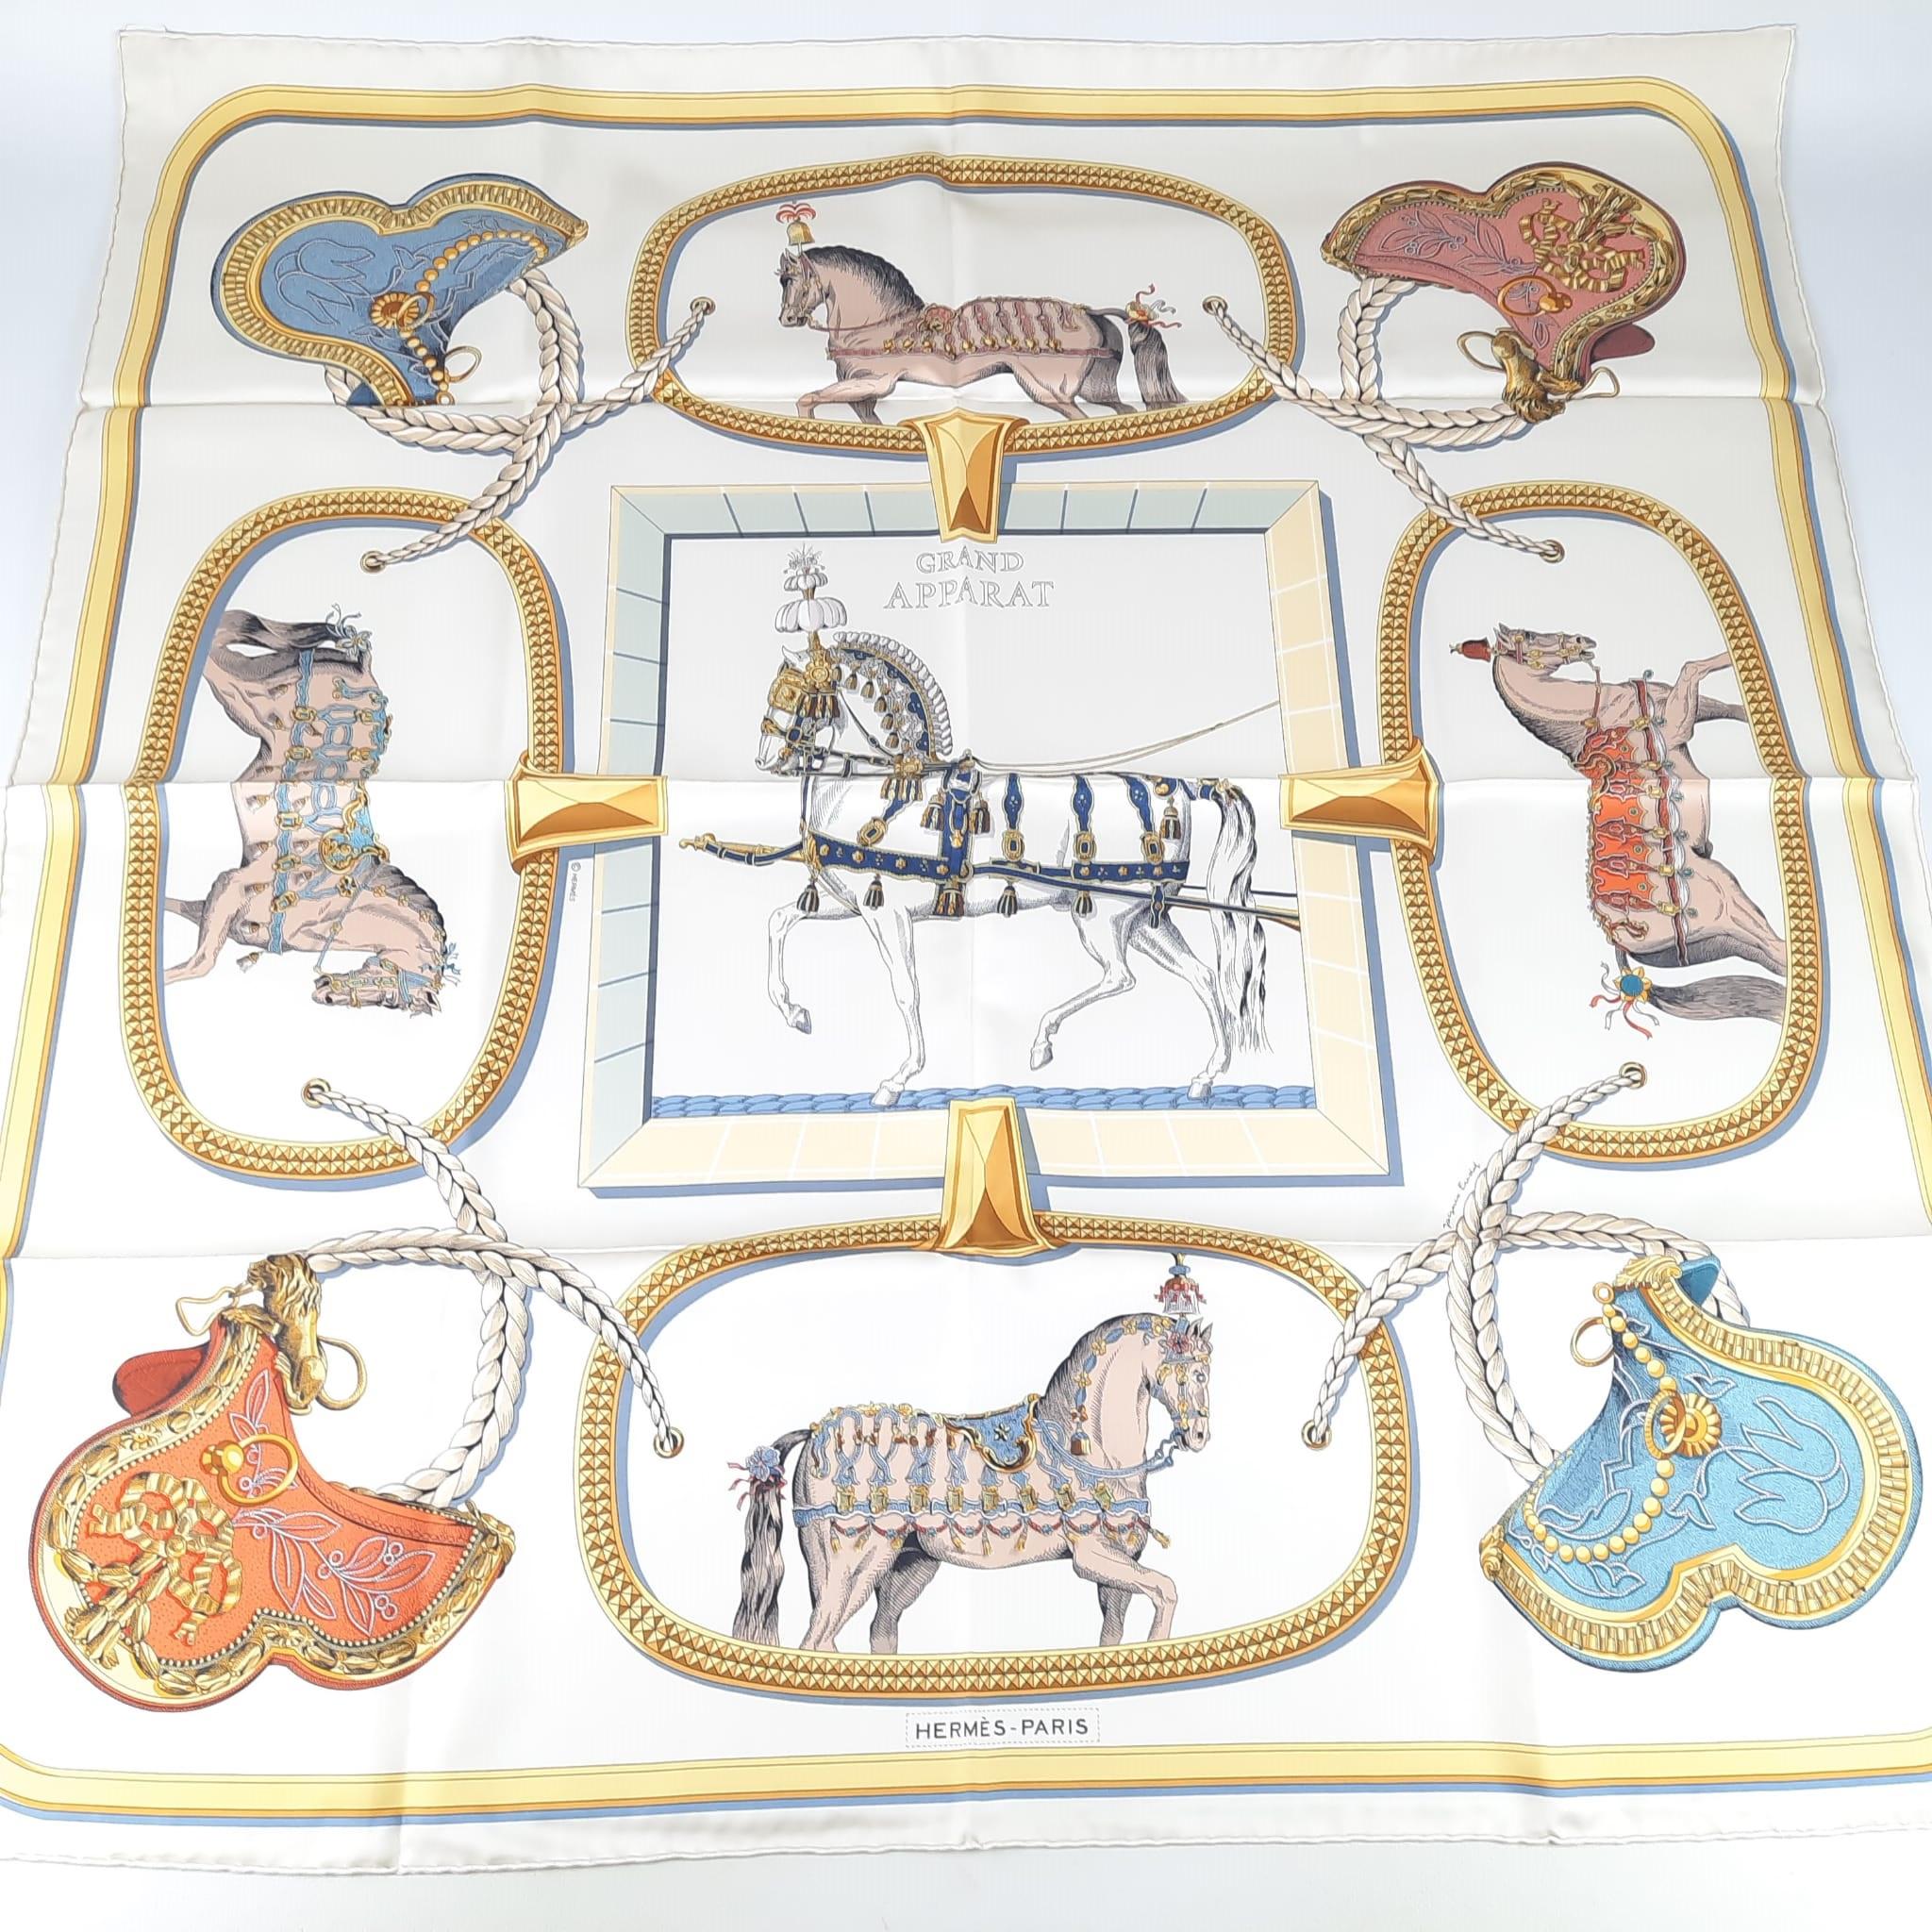 Hermes Crème / Gold / Multicolore Grand Apparat forever scarf 90 Neuf à Nicosia, CY